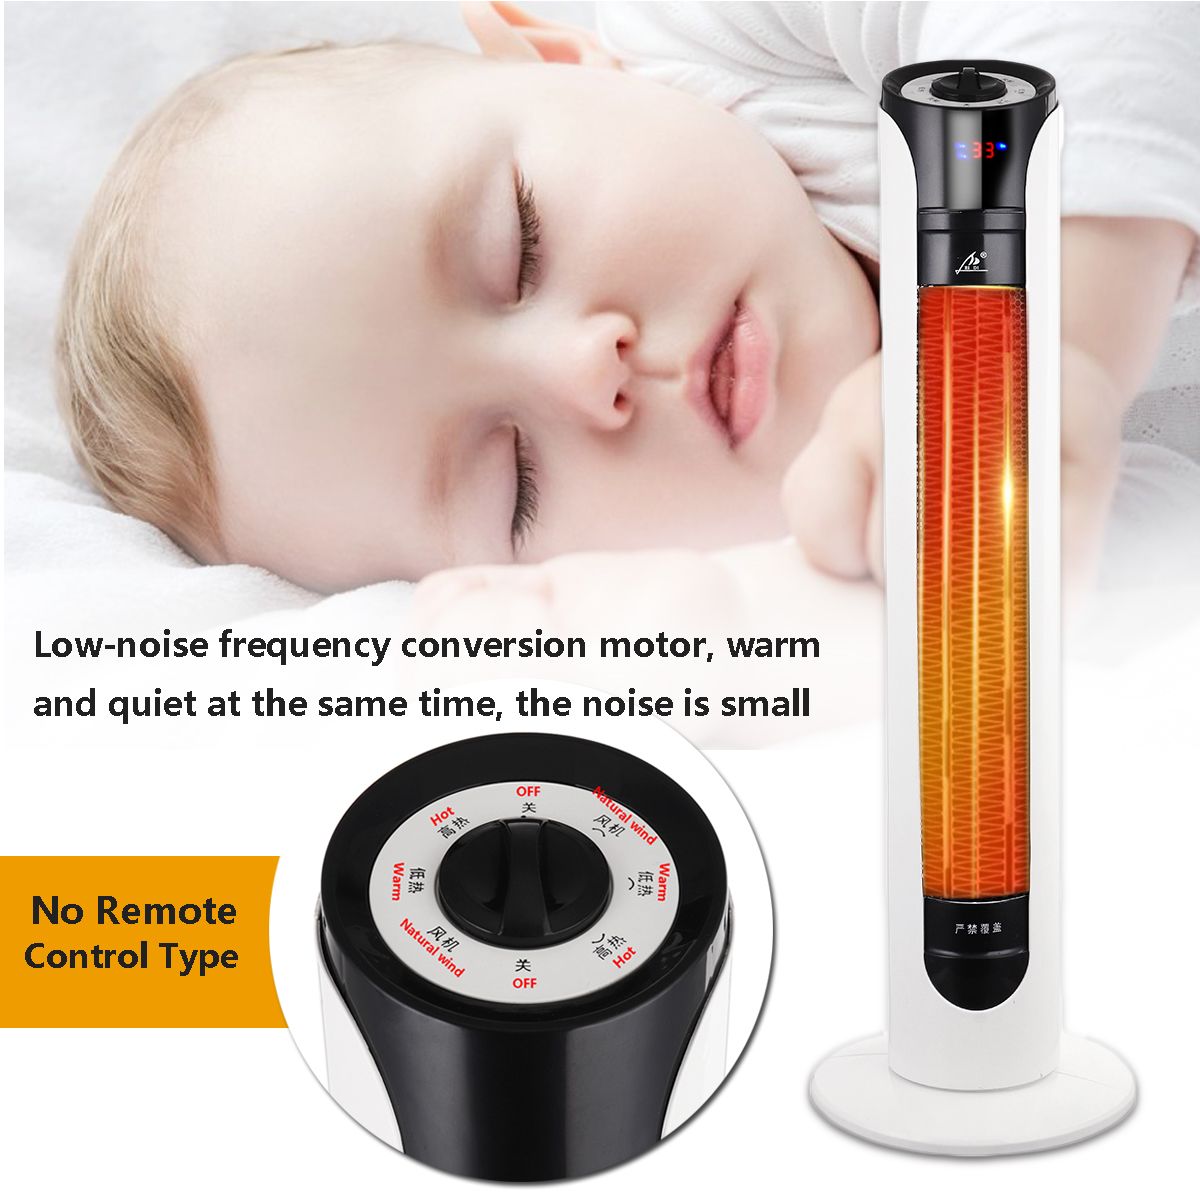 2000W-220V-PTC-Adjustable-Heating-Electric-Heater-Home-Air-Warmer-Tower-Fan-Remote-Control-1384373